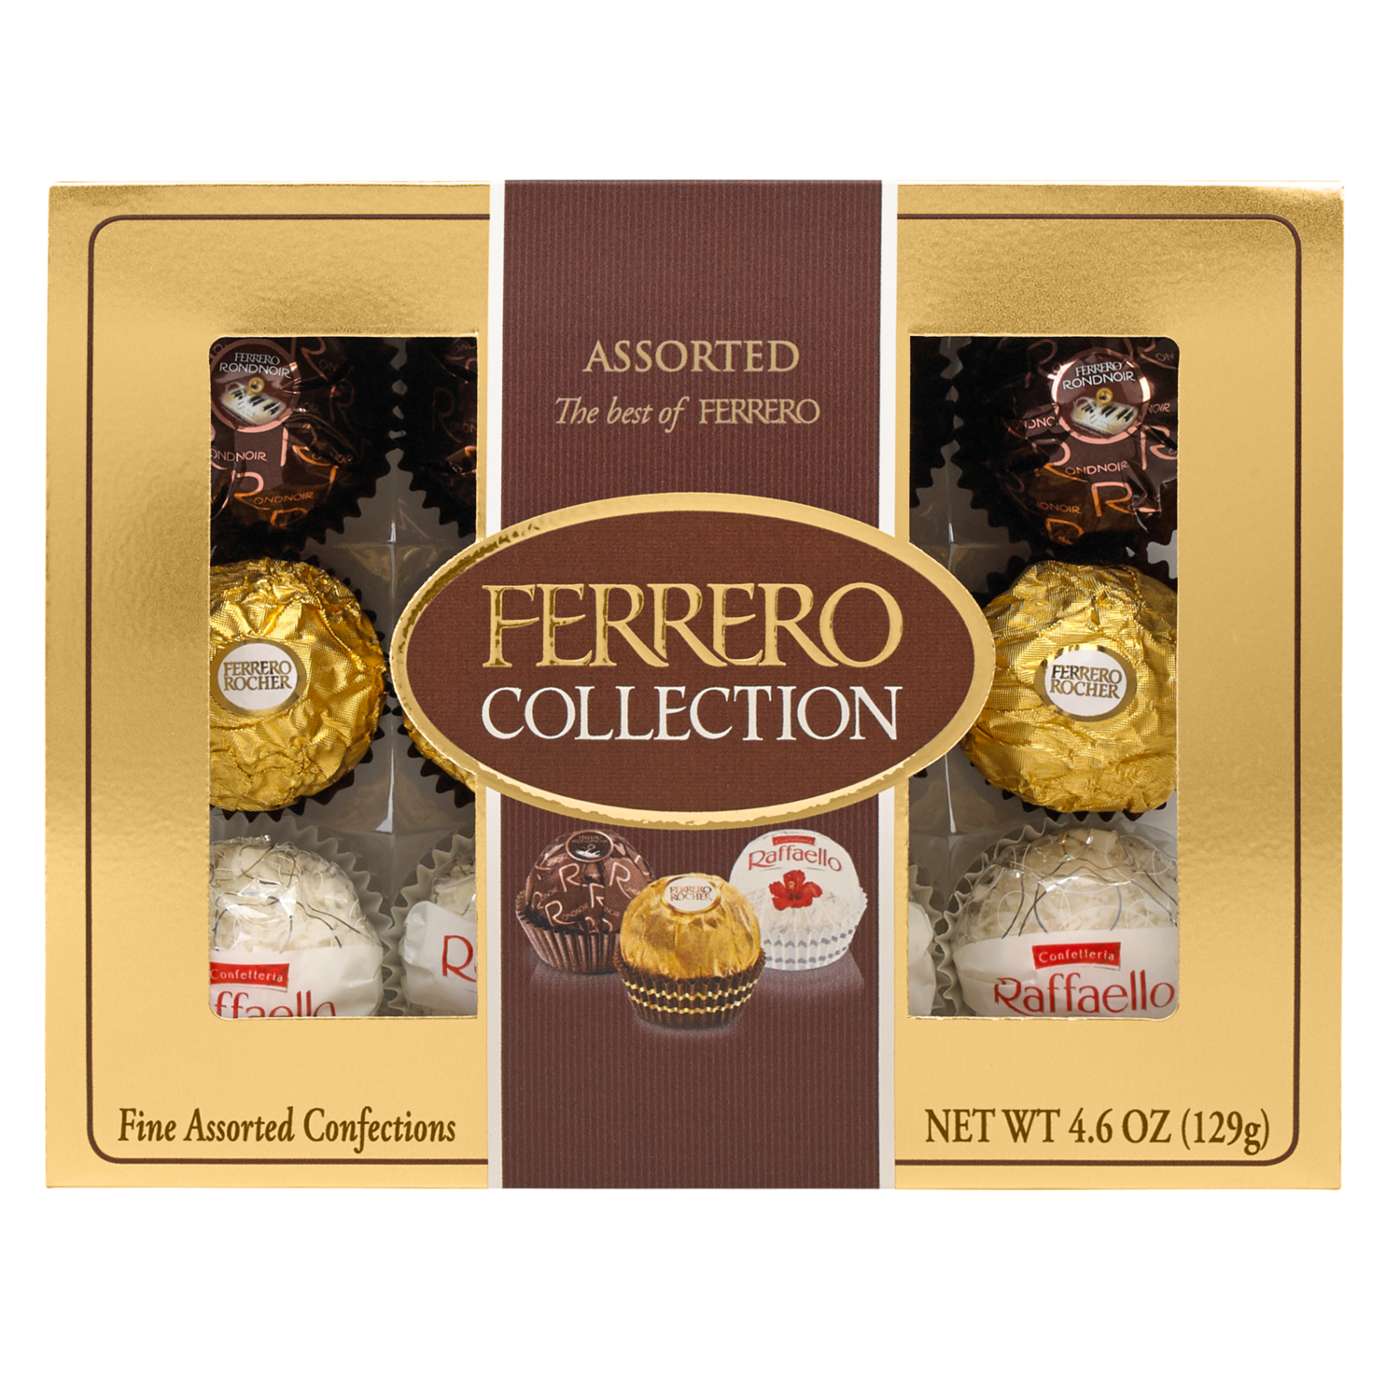 Ferrero Collection Confections, Fine Assorted